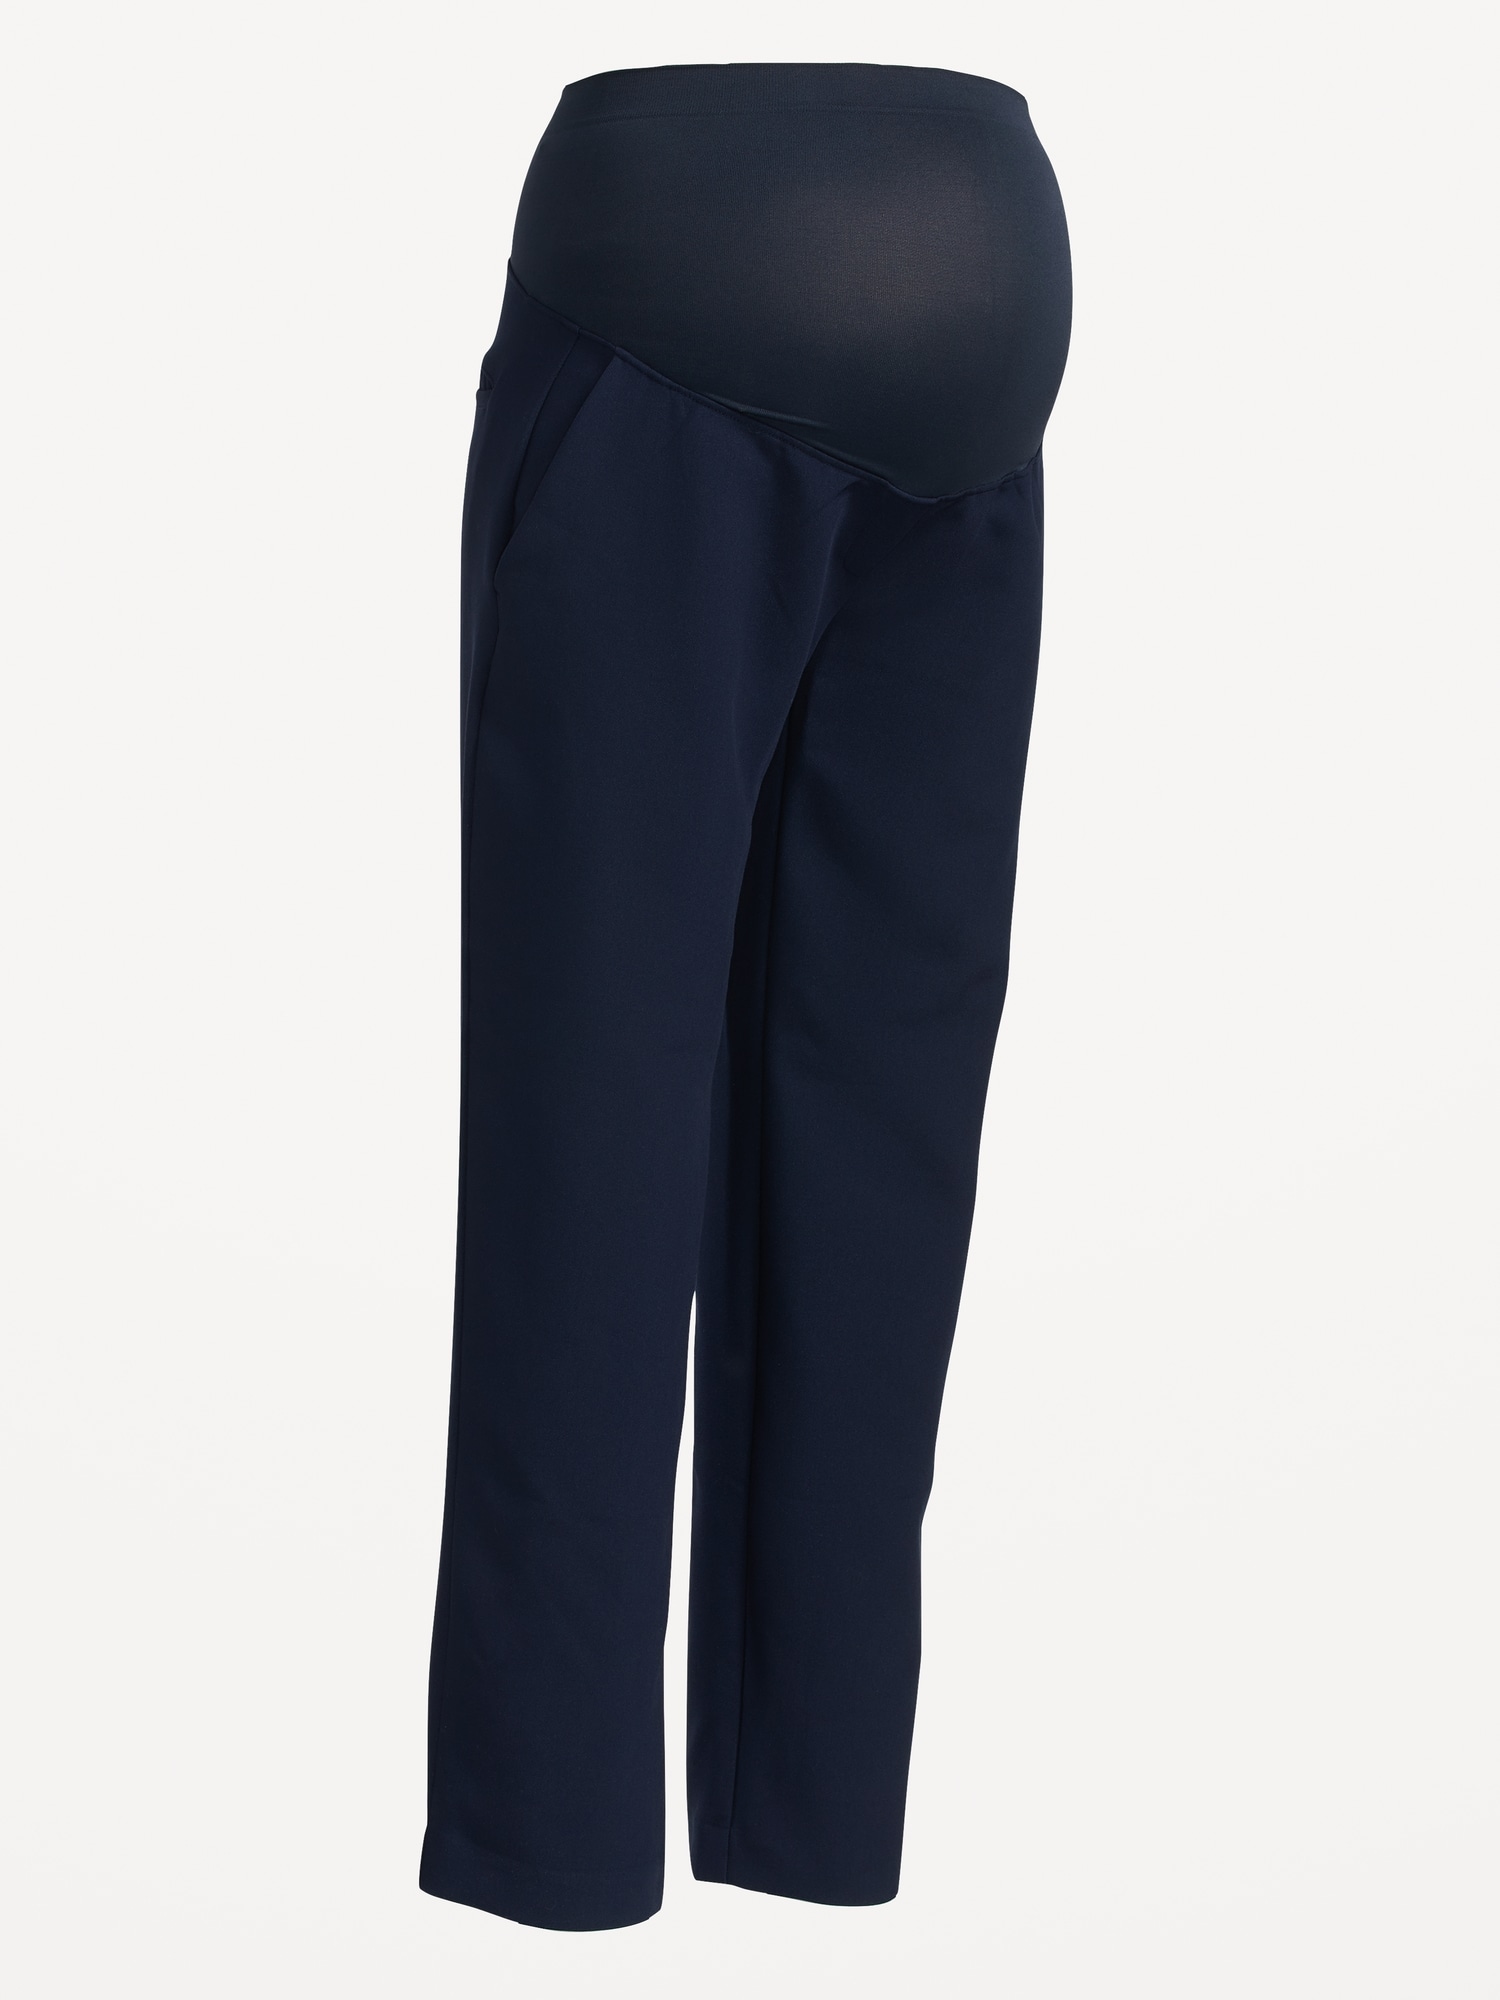 Maternity Pants - Buy Maternity Pants online at Best Prices in India |  Flipkart.com